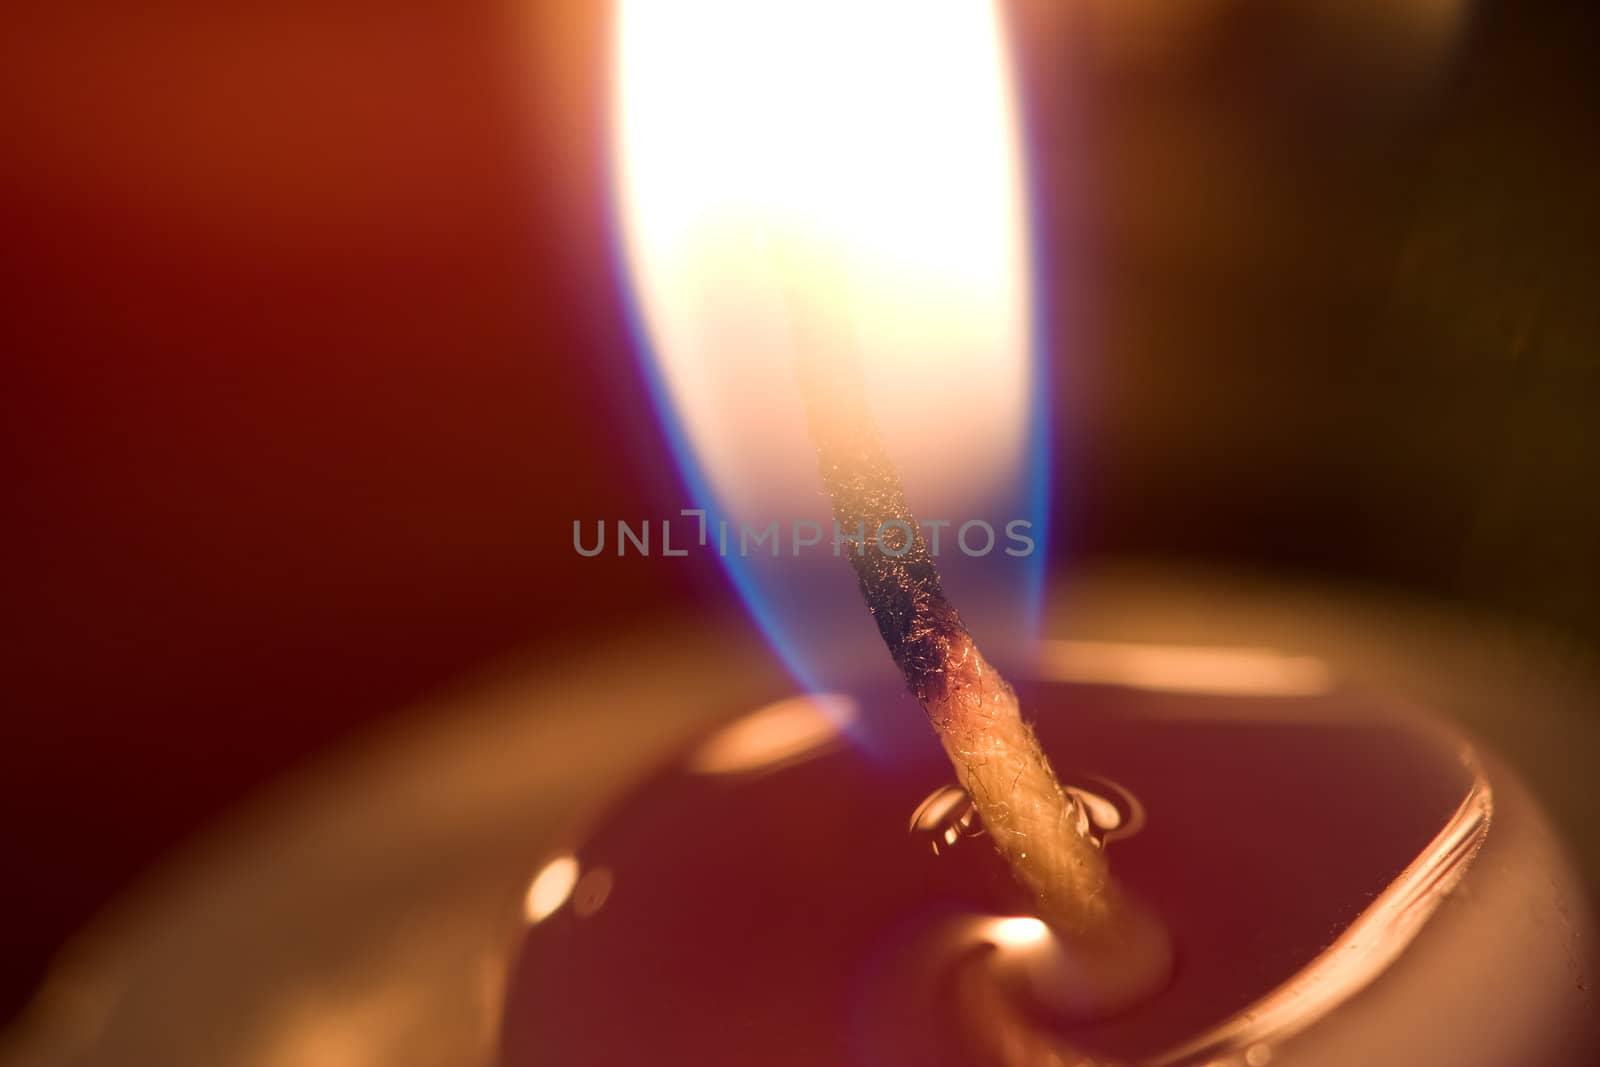 A close up of a lit candle and wick.